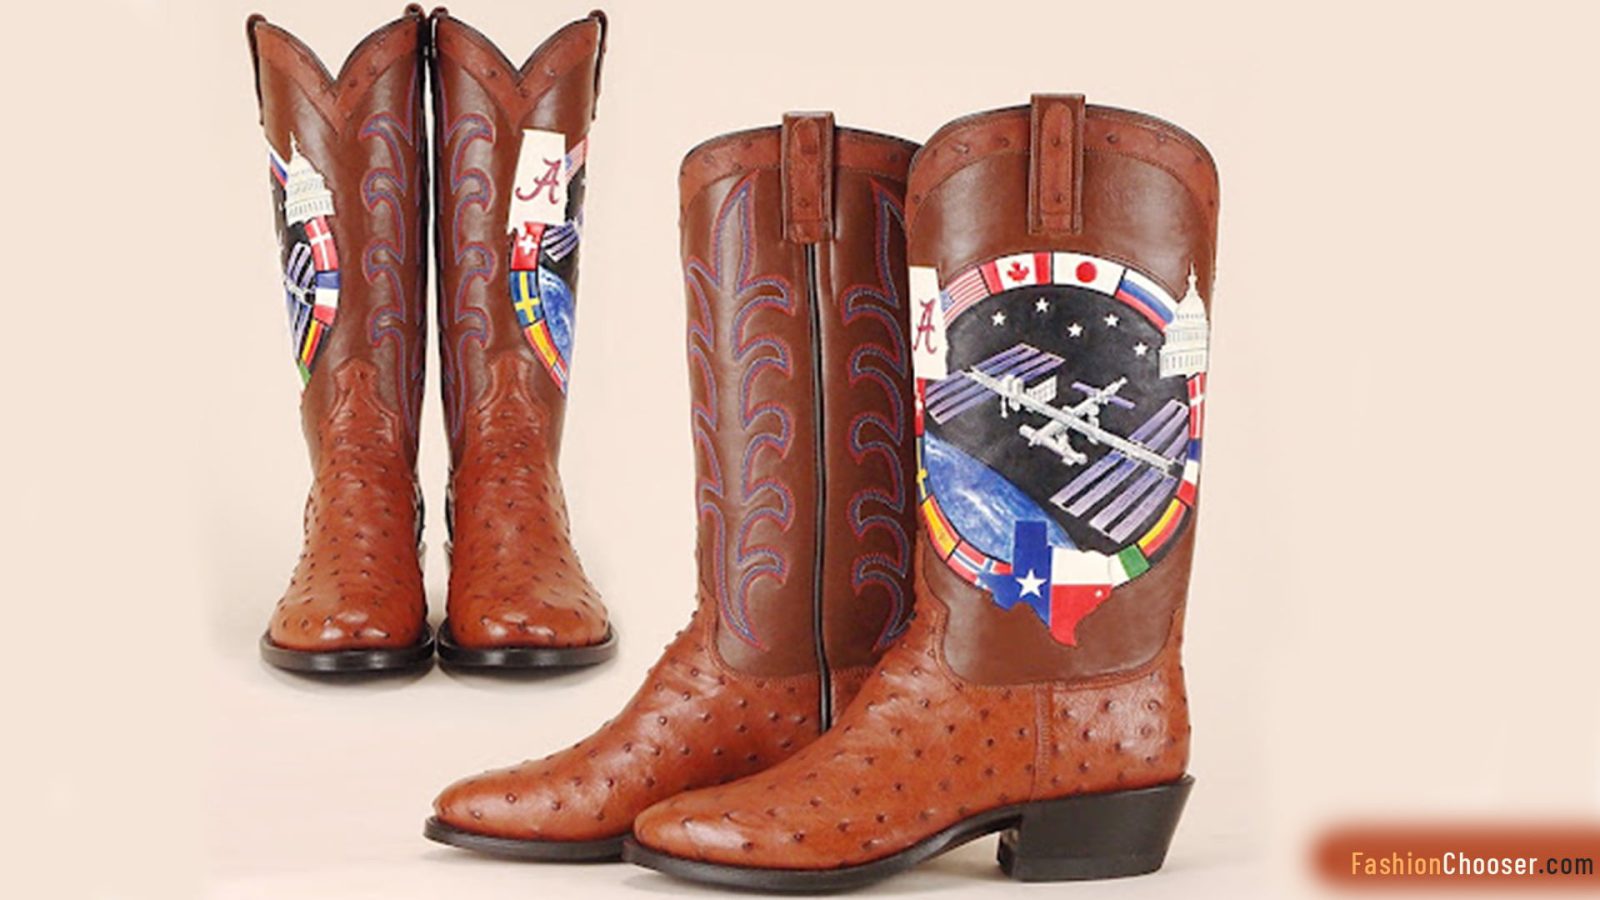 wheeler boot company are comfortable cowboy boots brand